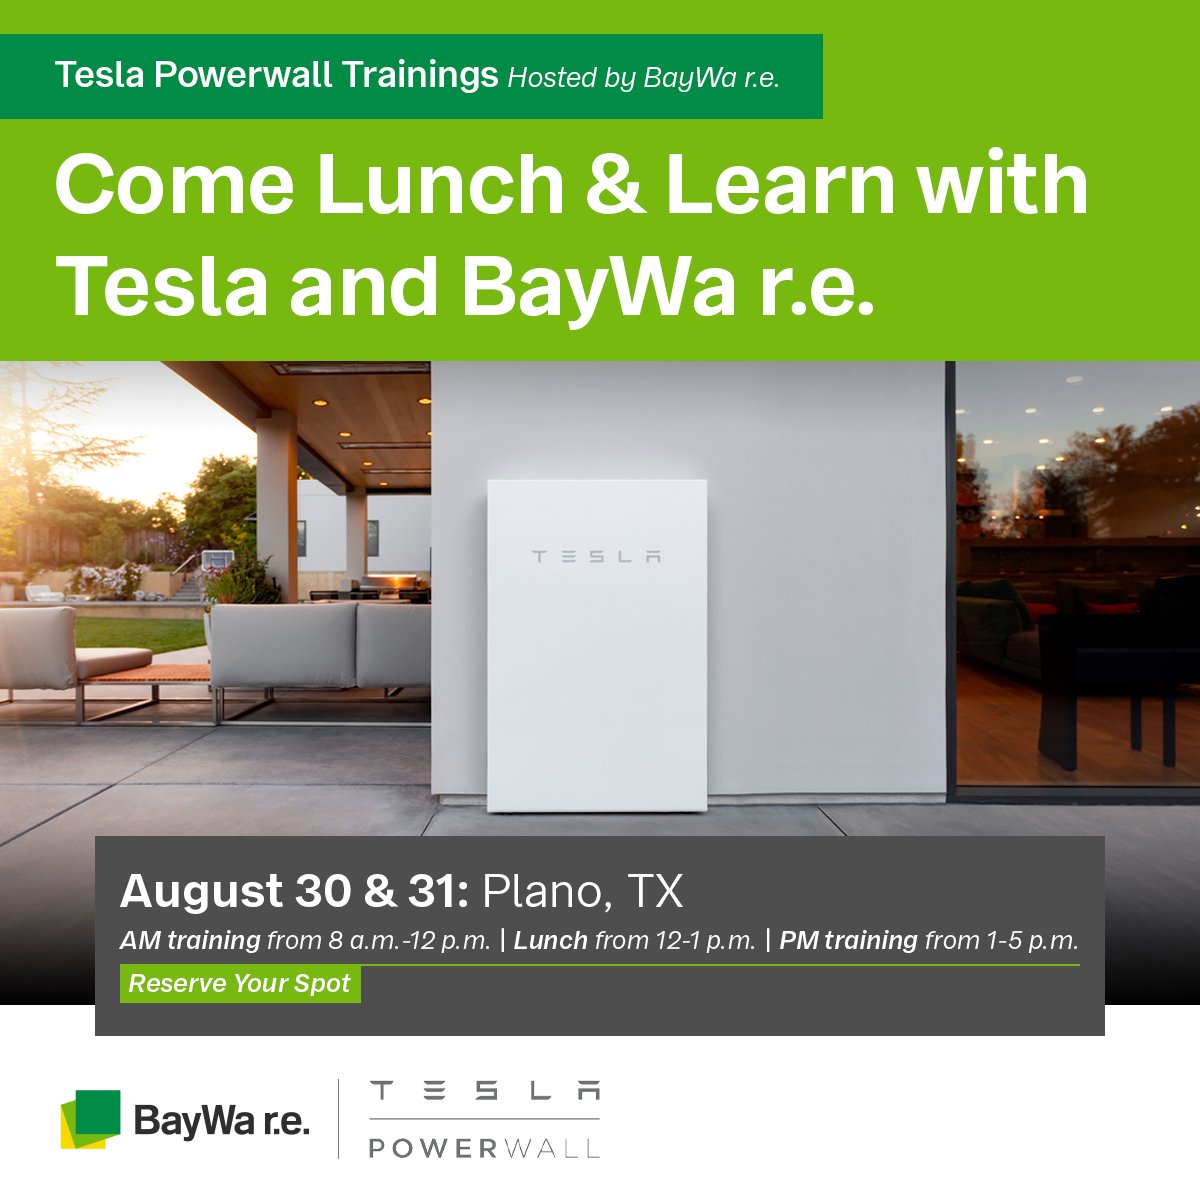 #SolarPros in Texas - the final stop of the #TeslaPowerwall Lunch & Learn is coming your way! Learn from the best and hear from each other - all while eating a free, delicious meal! RSVP today: tesla.com/events/baywa-p…